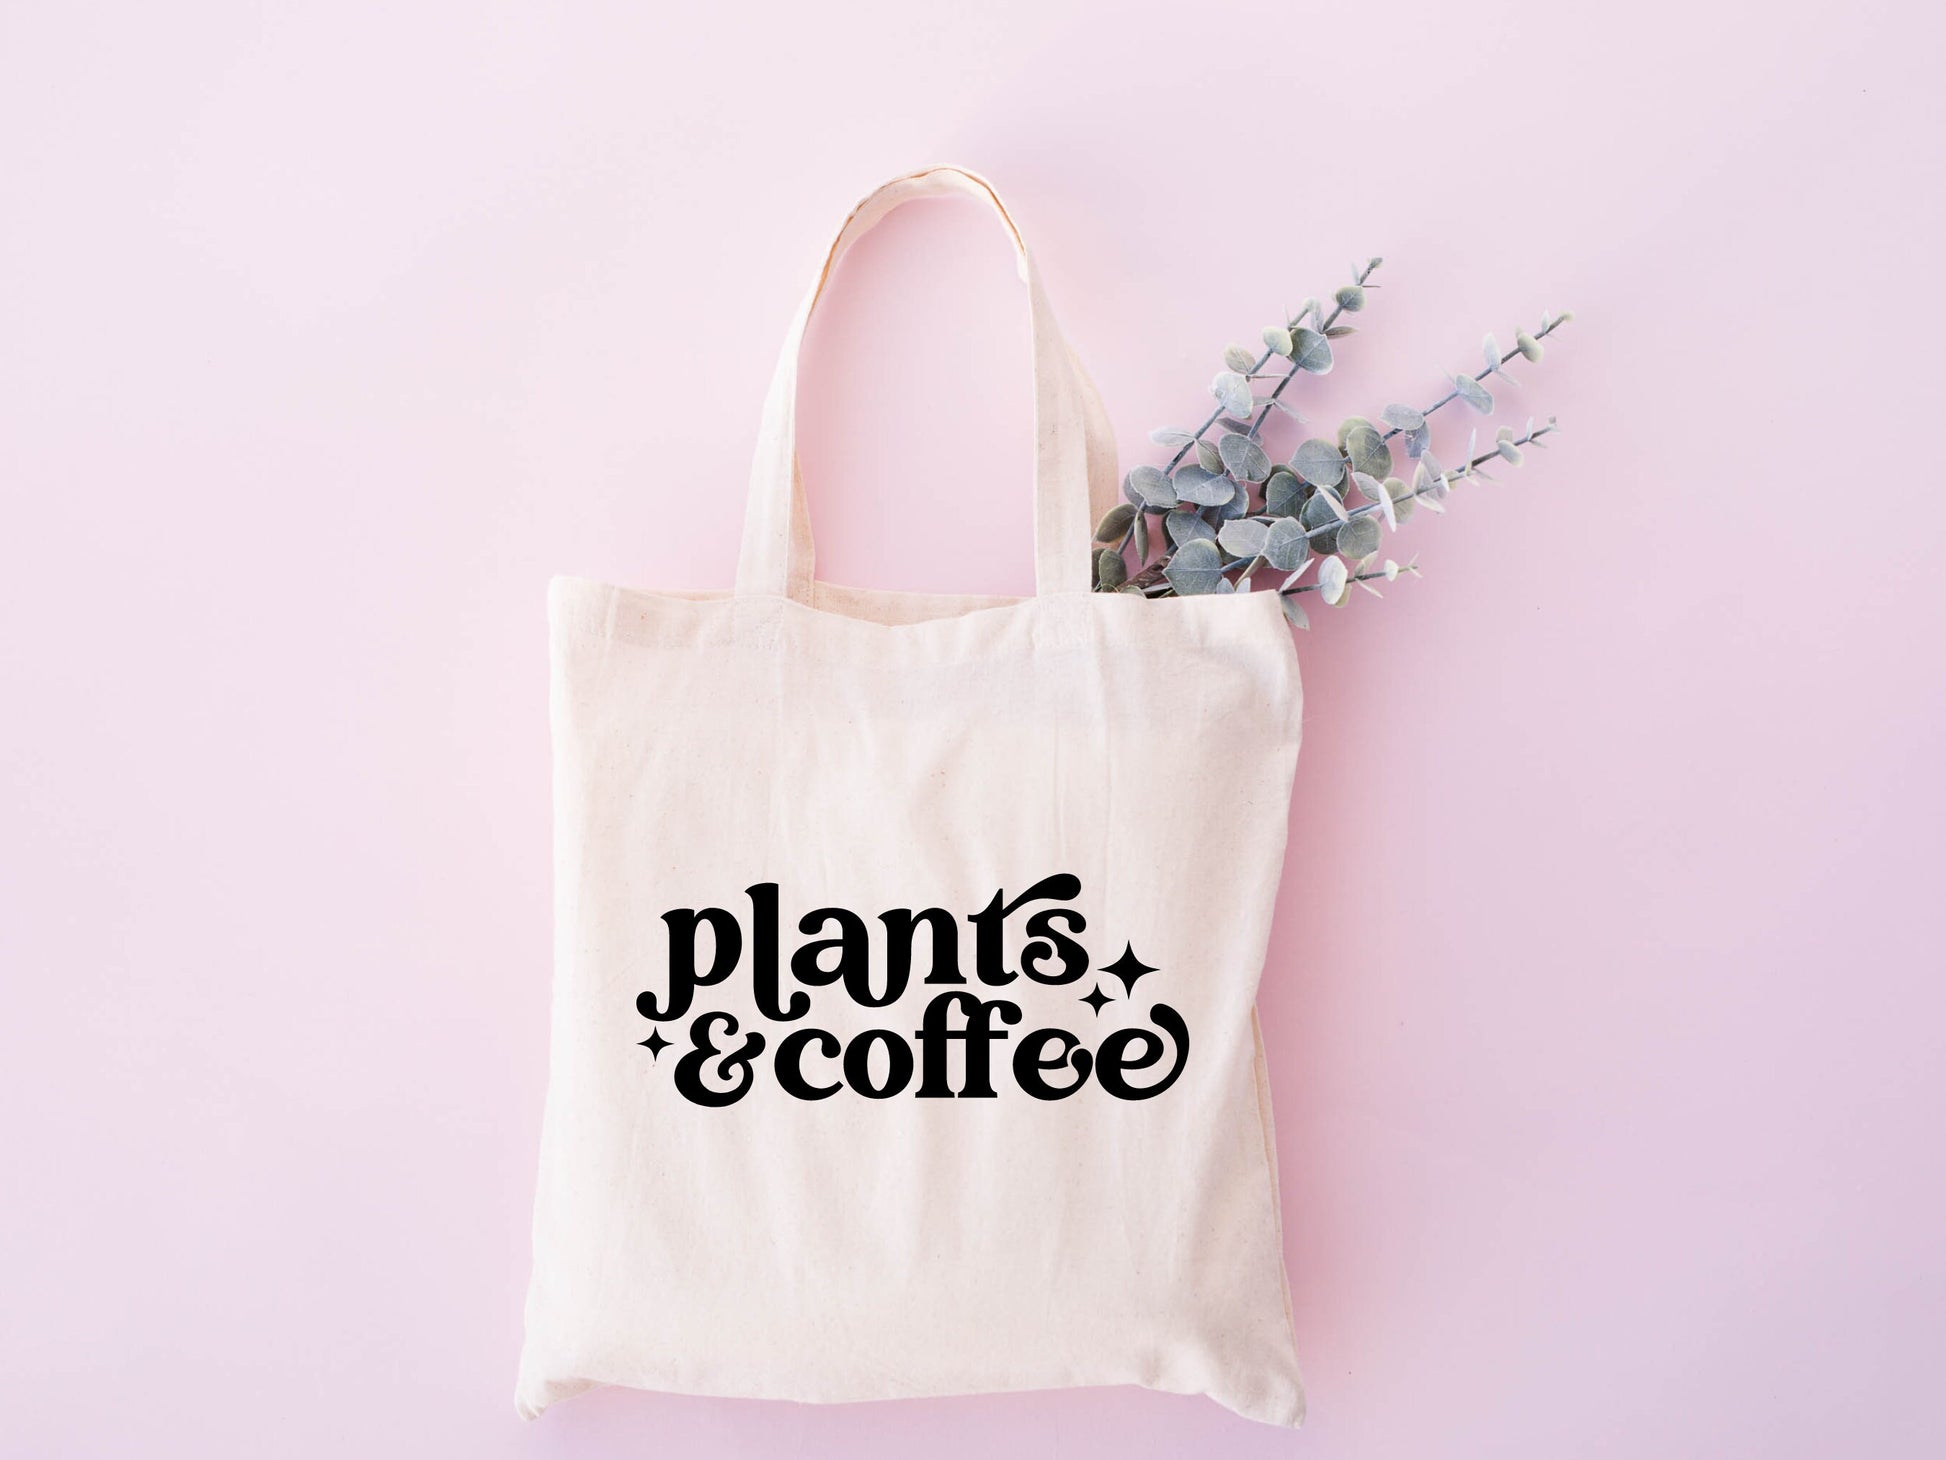 plants & coffee tote bag, gifts for best friends, reusable bag, shopping bags, funny gifts, shopping tote, gifts for plant lover, plant gift